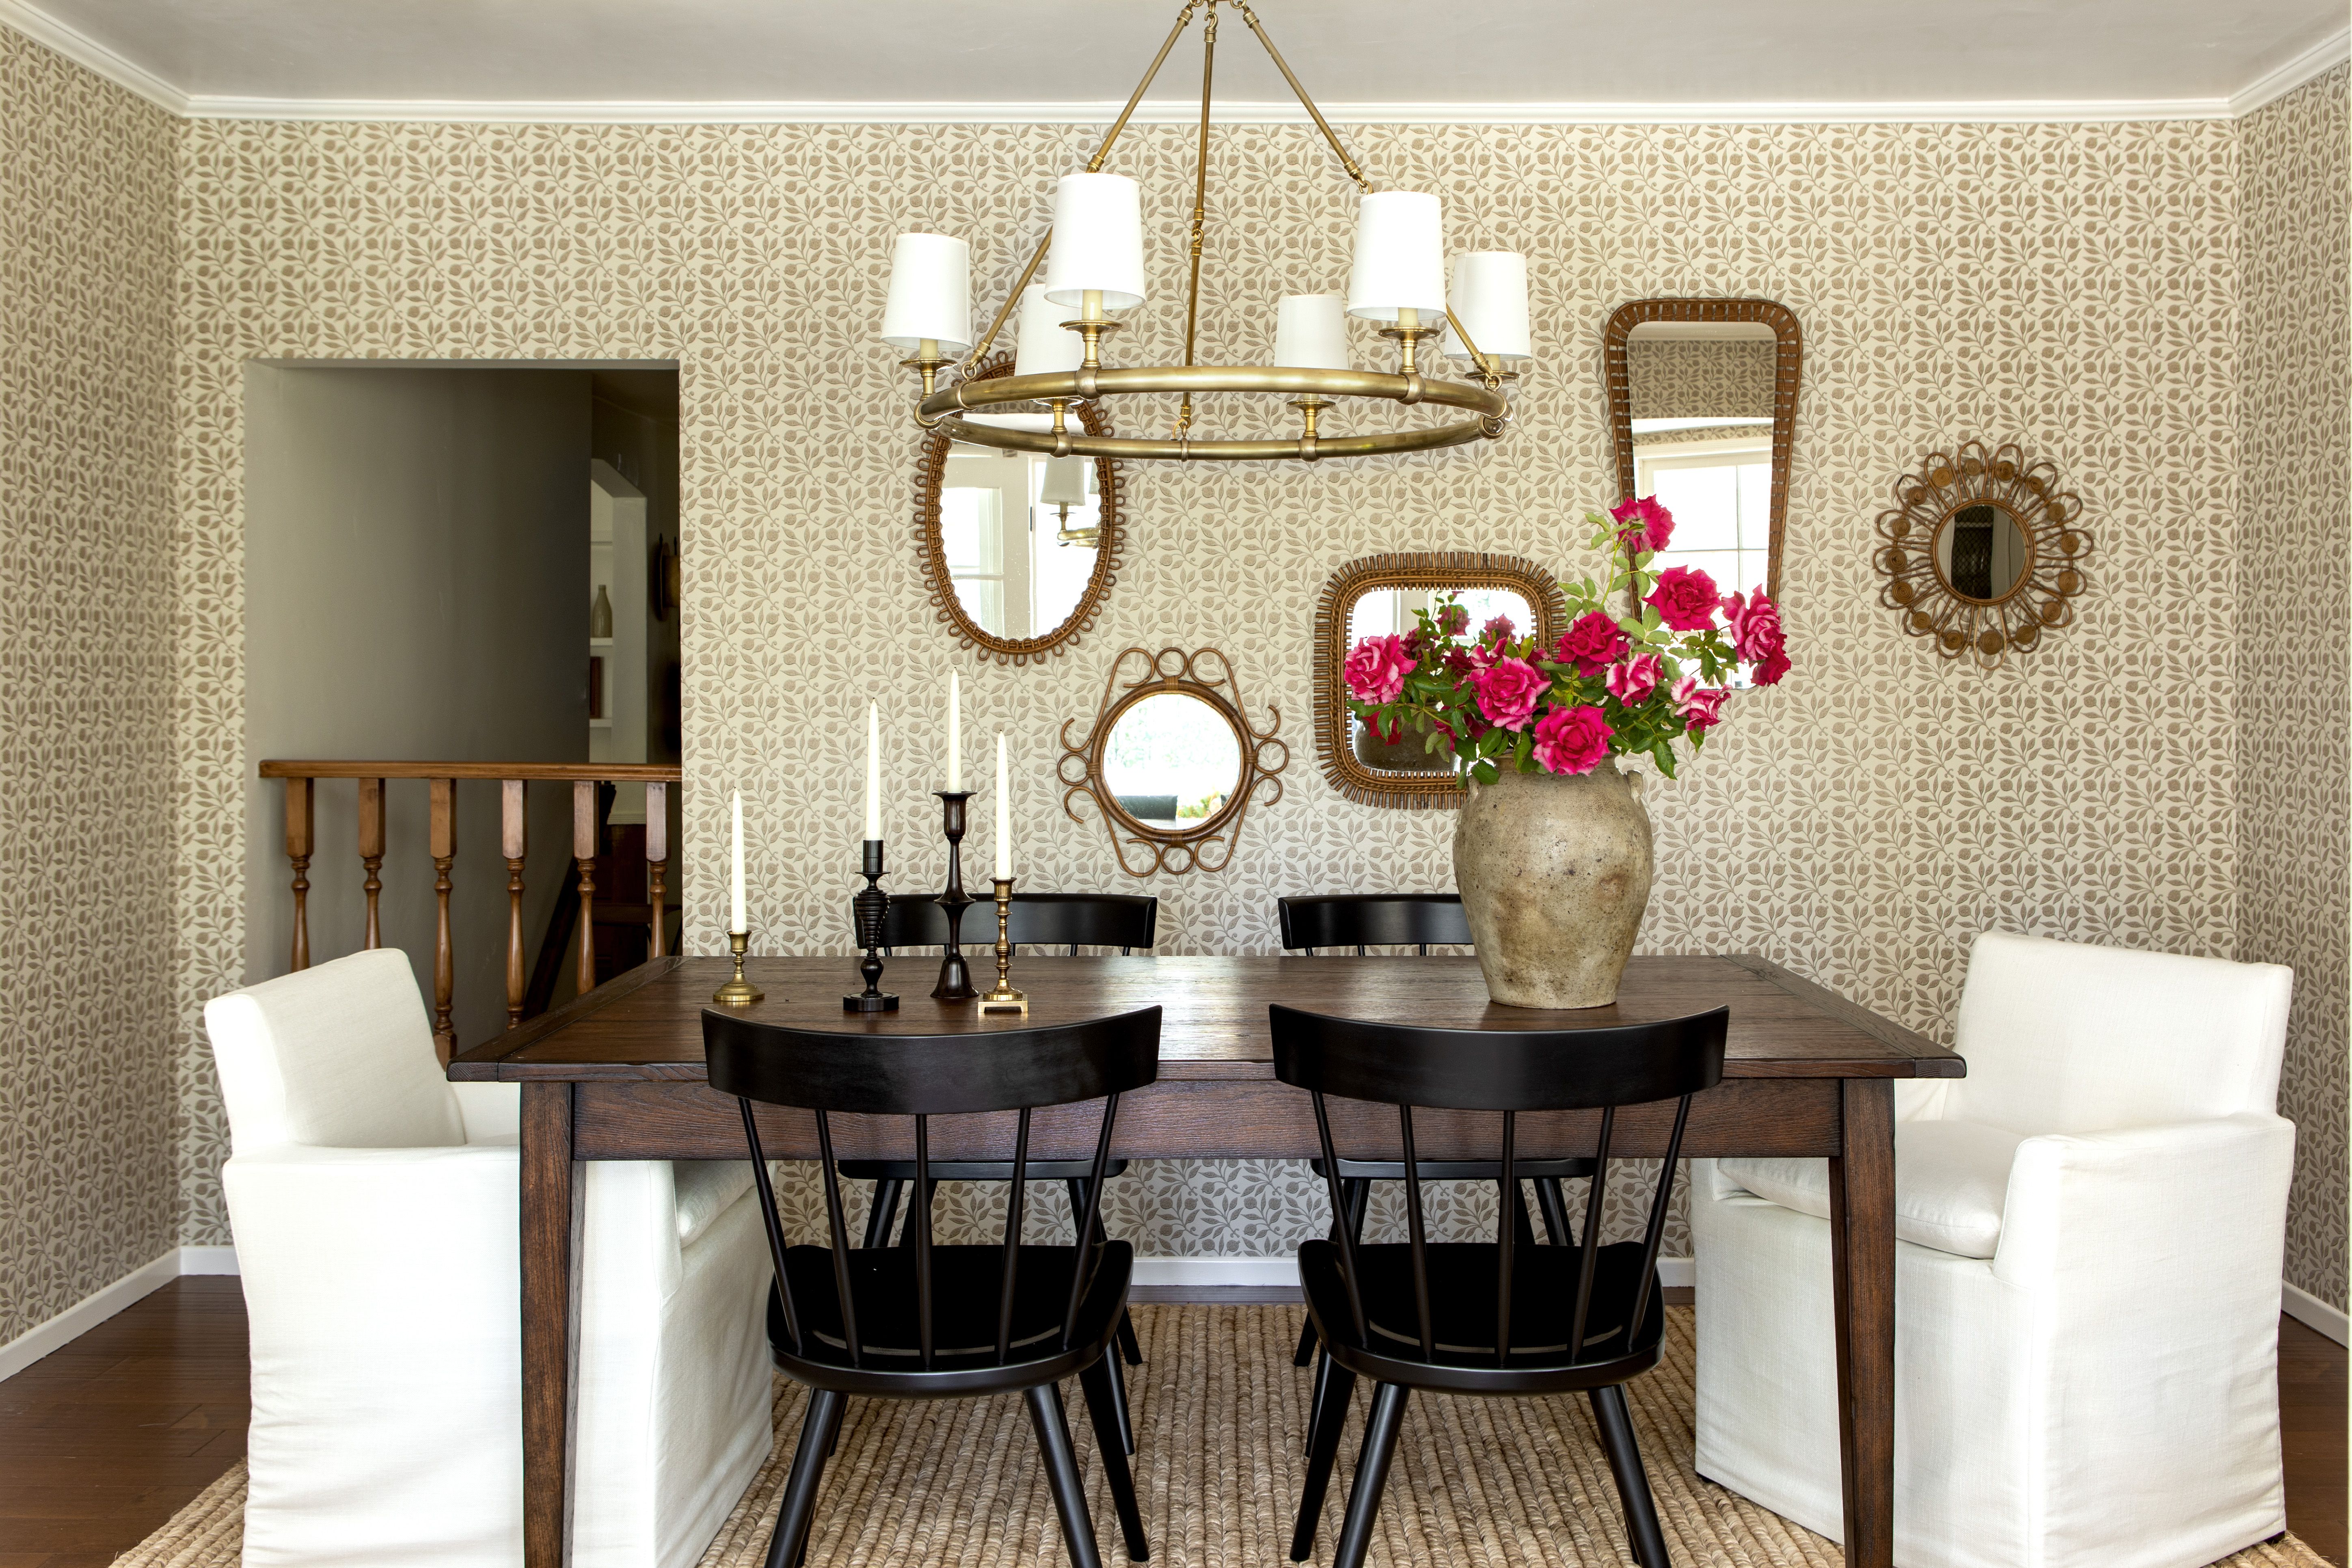 Dining Room Table Ideas: 15 Easy Decorating and Styling Ideas